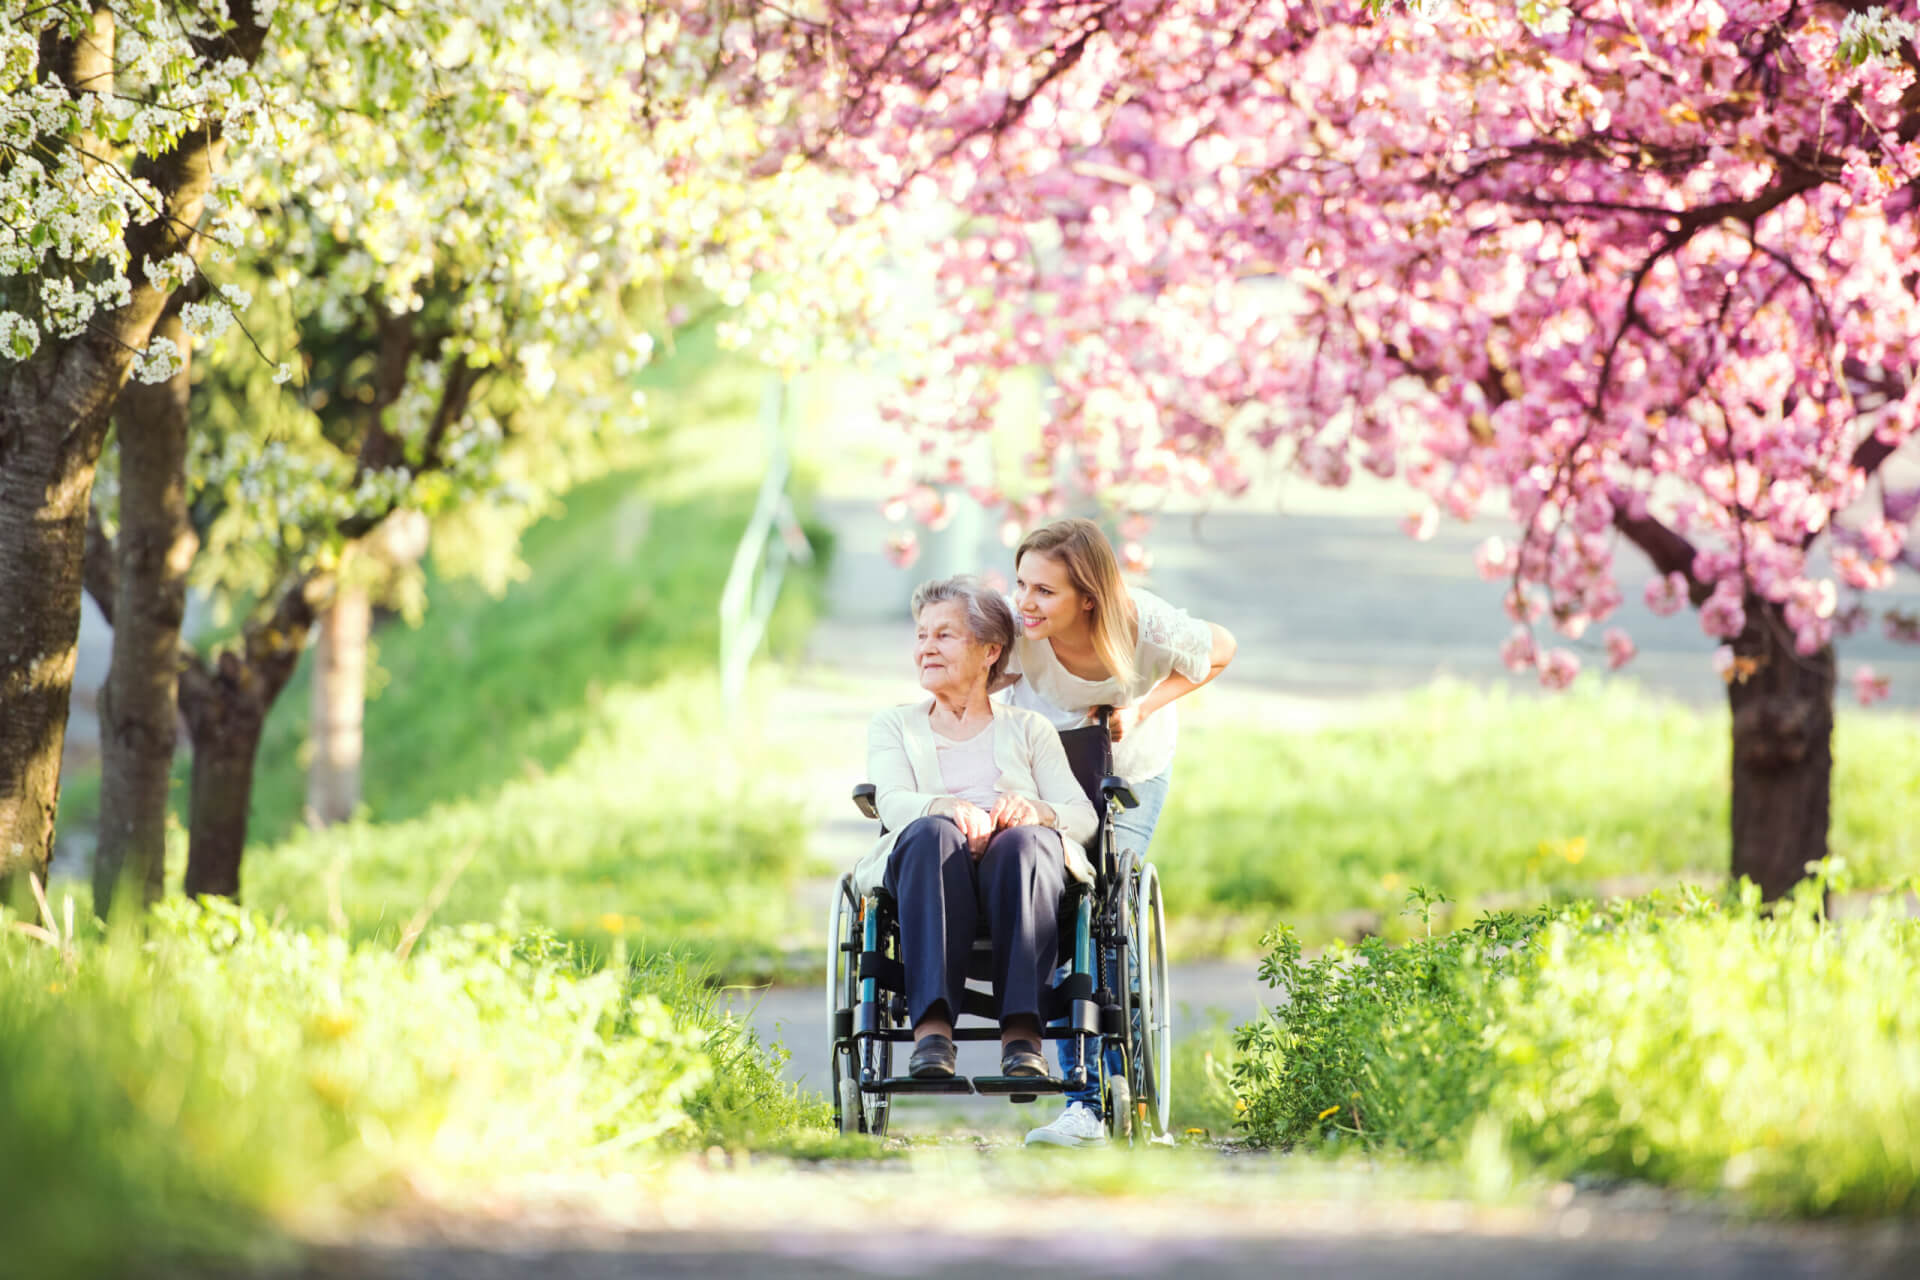 Blonde woman is pushing elderly lady in a wheelchair through a park. They are surrounded by trees, some with pink spring blossoms